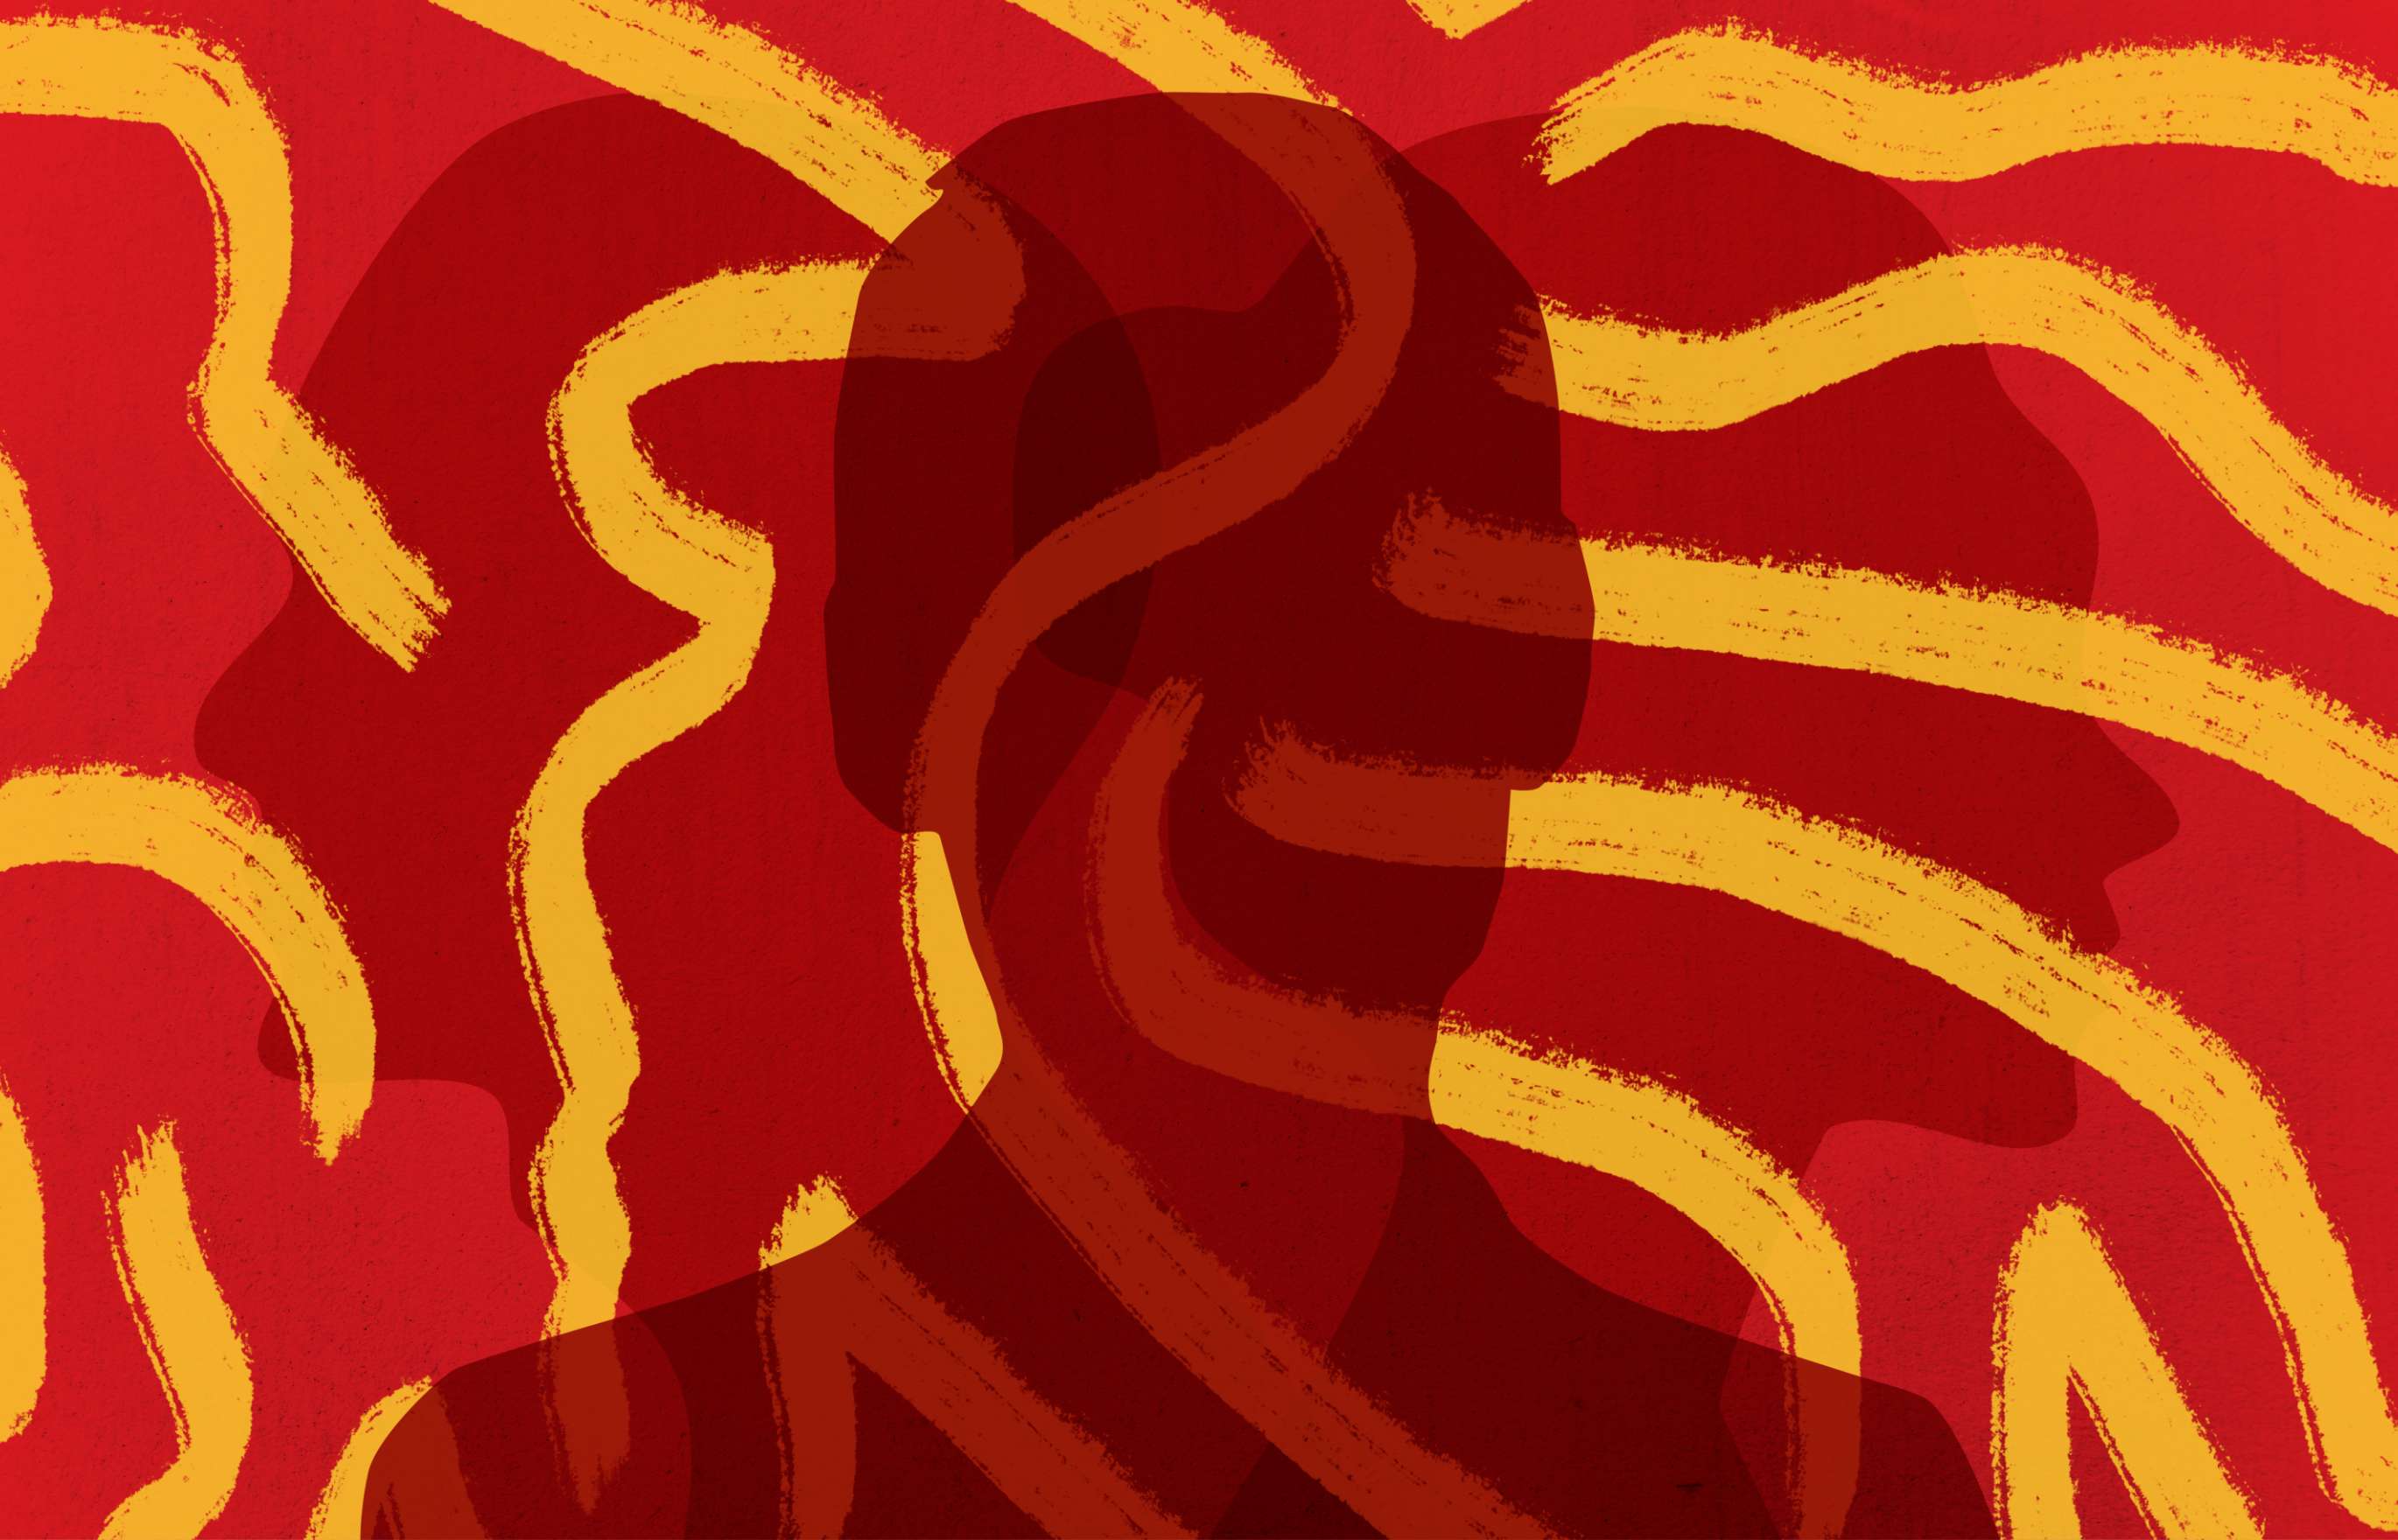 An illustration depicting the overlapping silhouettes of three people, two in profile, and one facing directly ahead, atop a red and yellow patterned background.